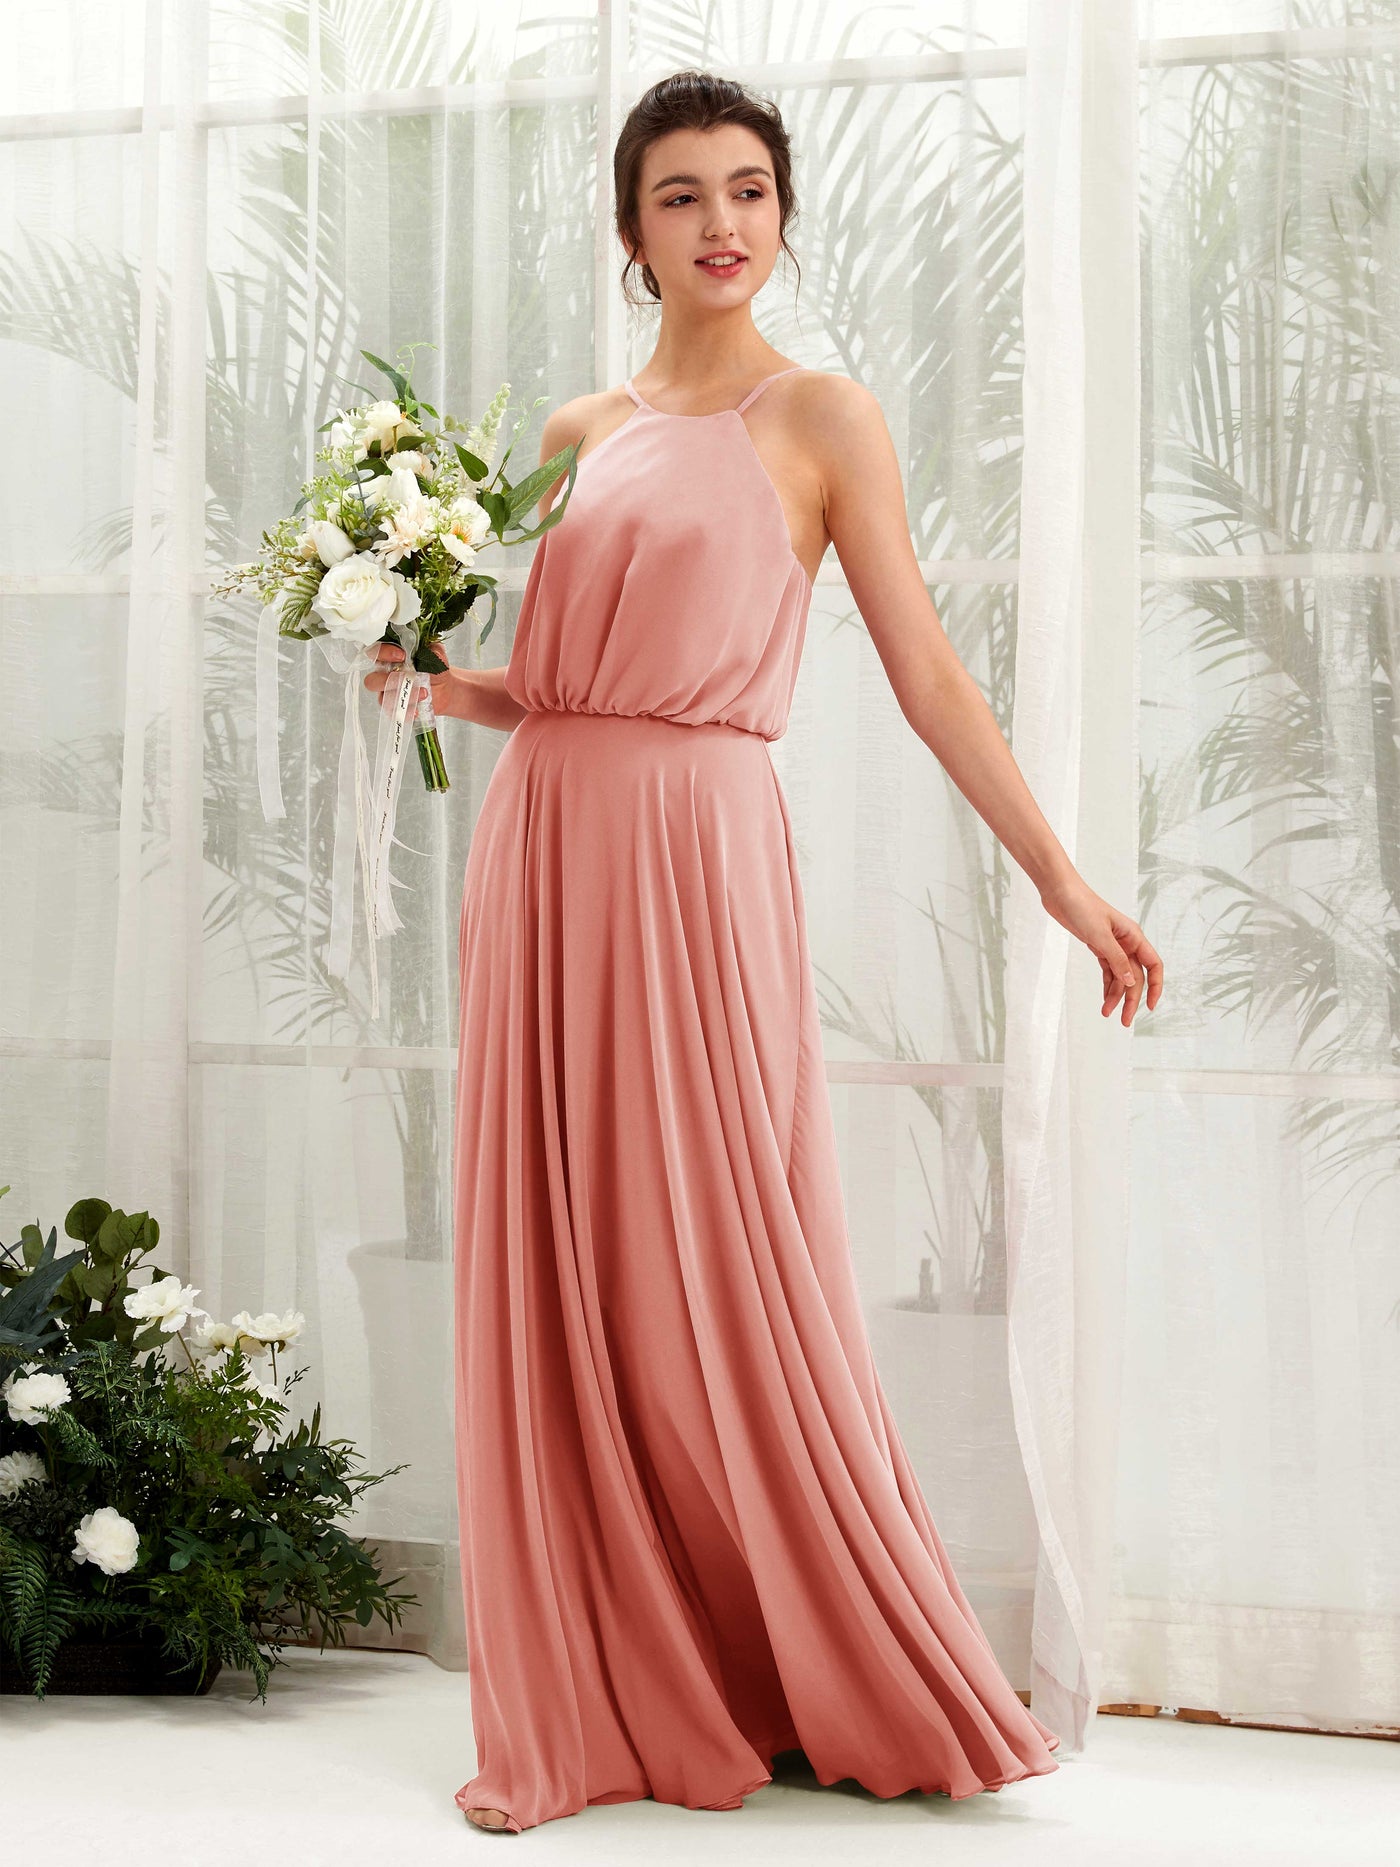 Champagne Rose Bridesmaid Dresses Bridesmaid Dress Ball Gown Chiffon Halter Full Length Sleeveless Wedding Party Dress (81223406)#color_champagne-rose